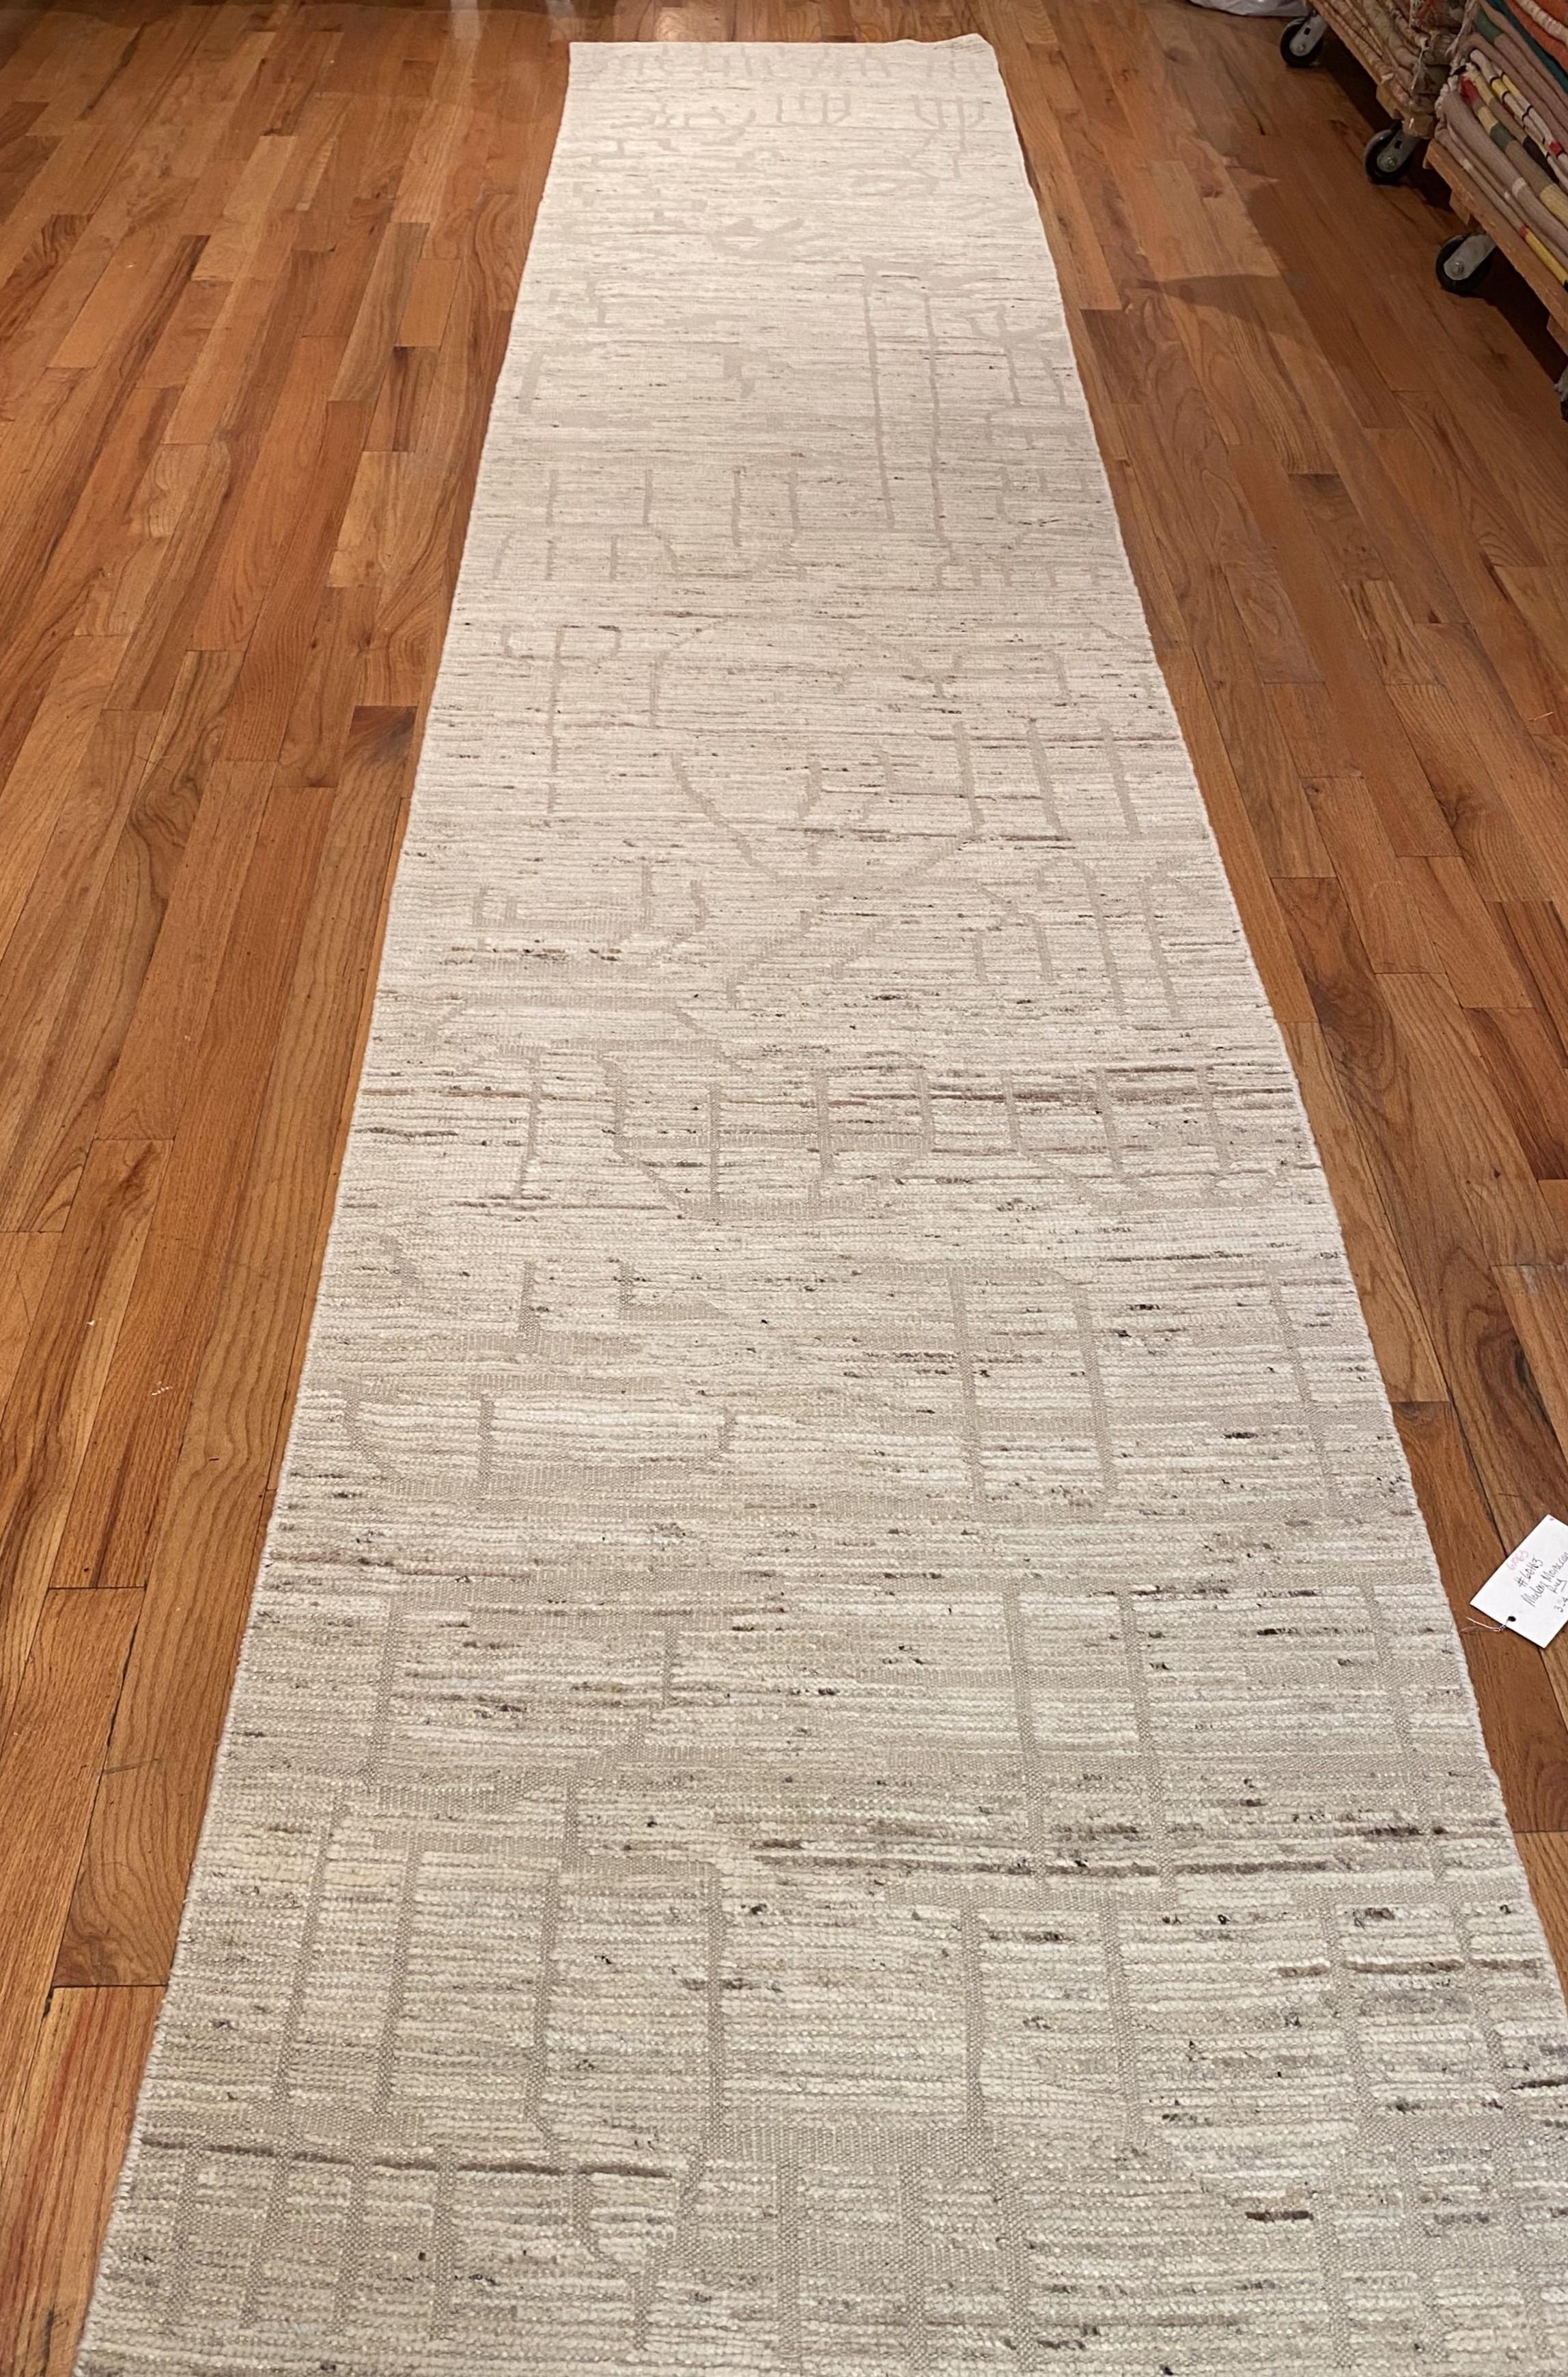 Cream Color Modern Moroccan Style Runner Rug, Country of Origin: Afghanistan. Circa date: Modern. Size: 3 ft 4 in x 19 ft (1.02 m x 5.79 m)